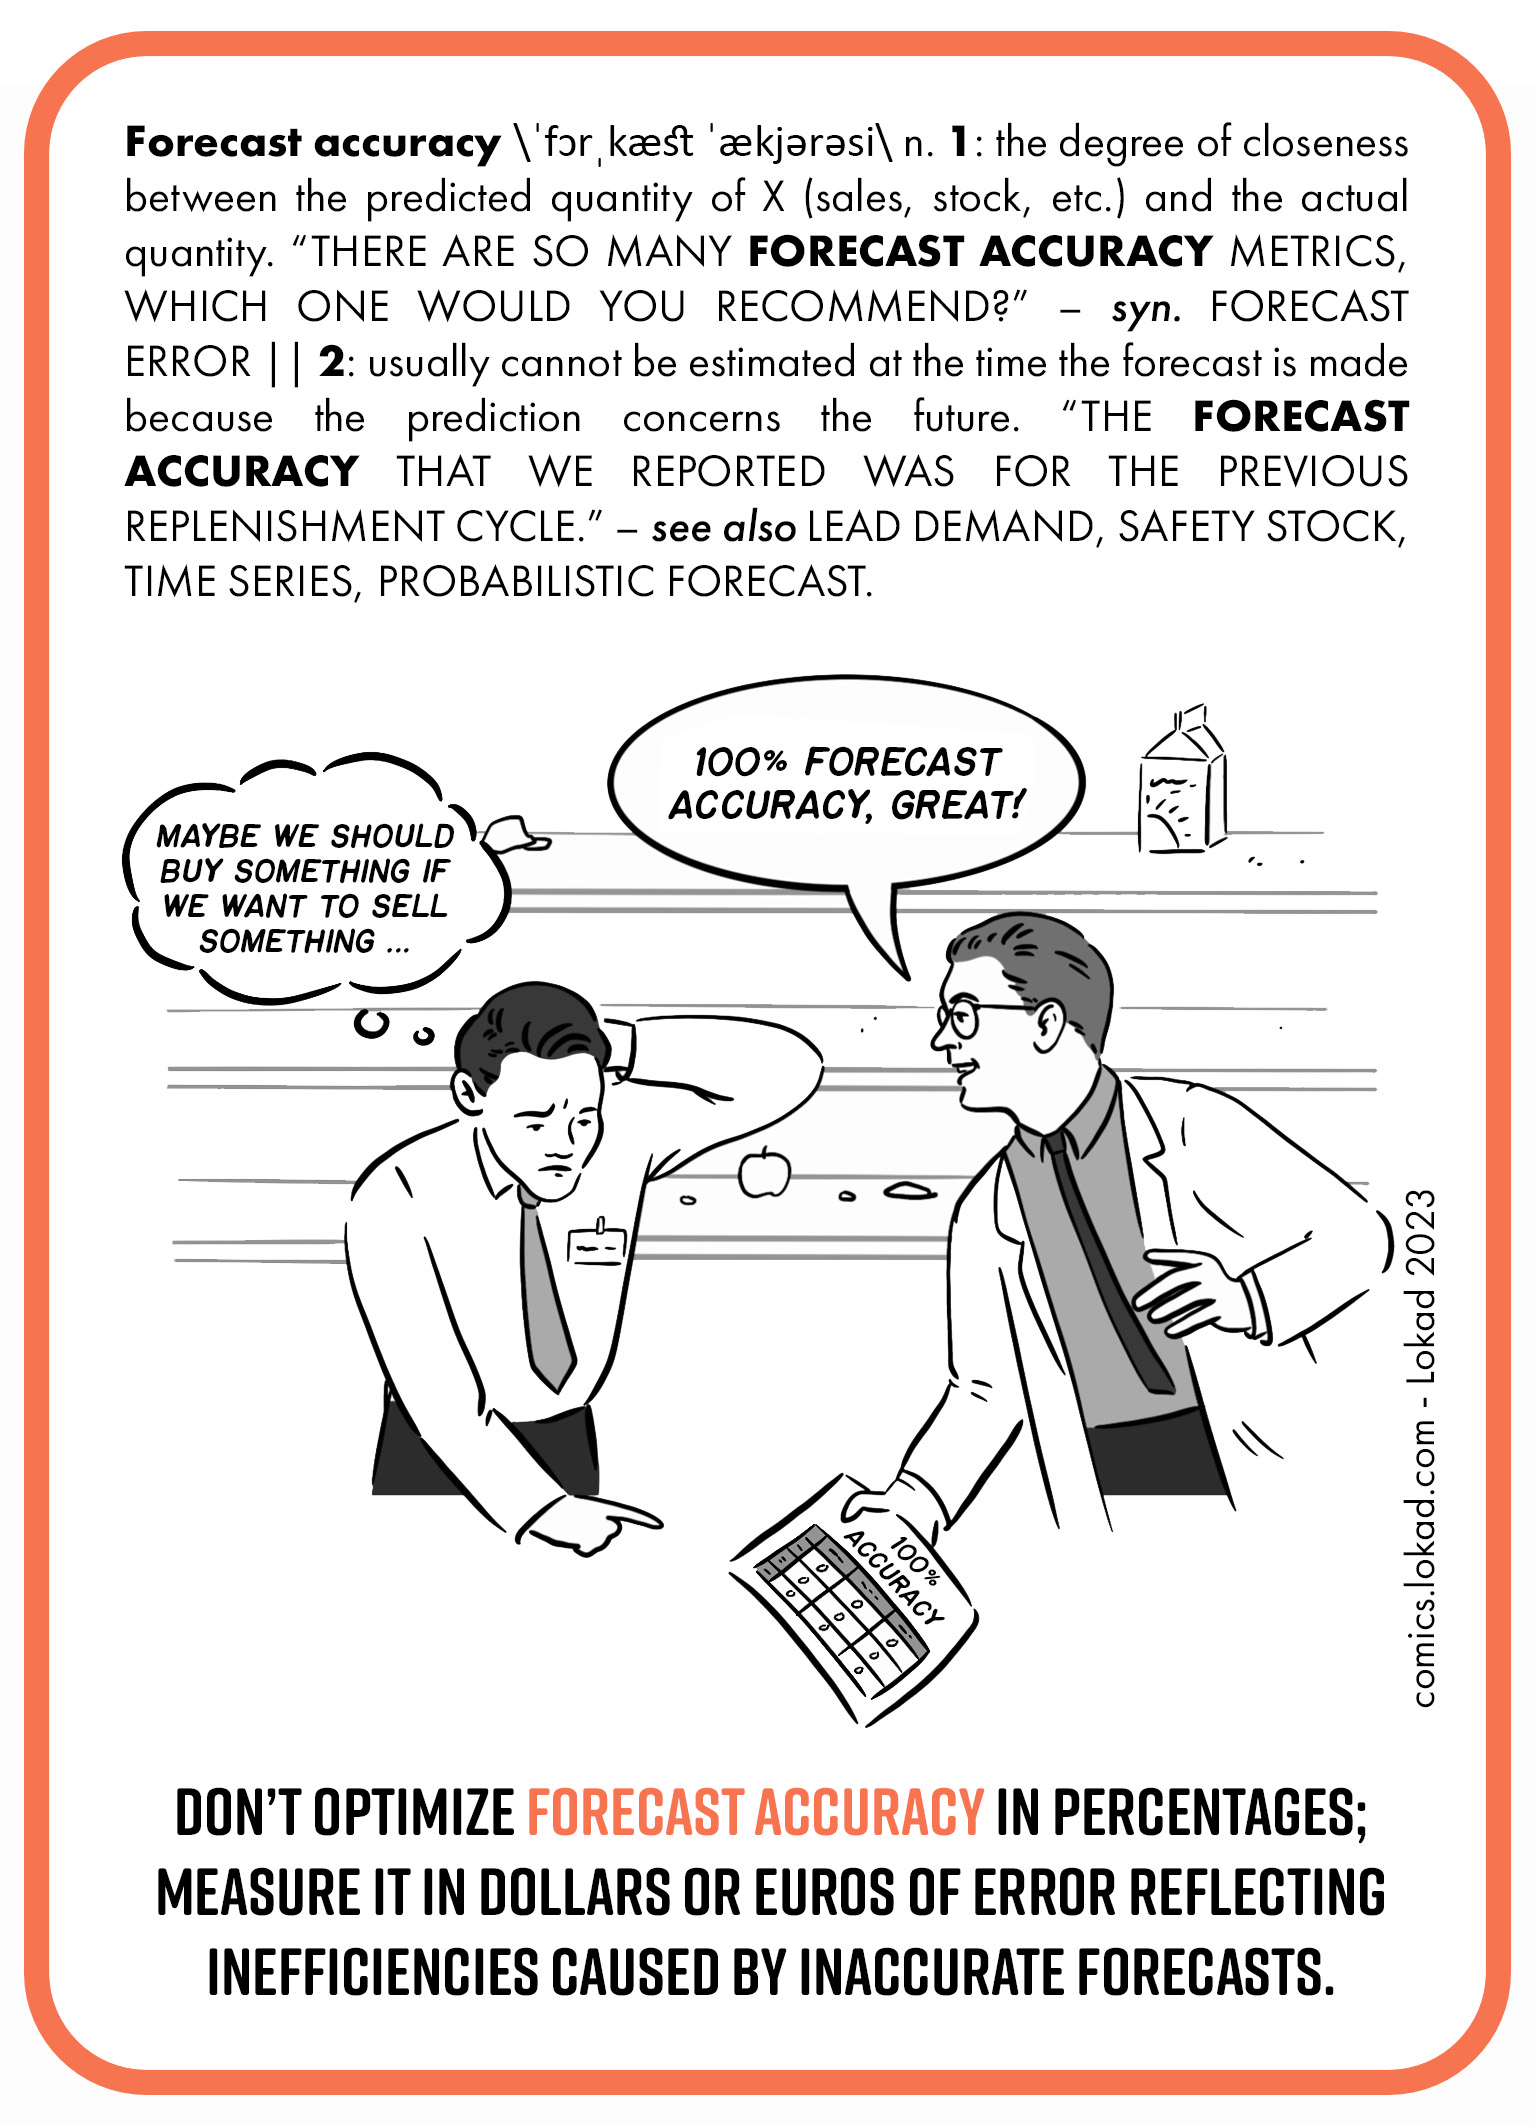 A supply chain flashcard explaining Forecast Accuracy. It defines forecast accuracy as the closeness between predicted and actual quantities. It discusses the difficulty in recommending a specific forecast accuracy metric and notes that usually, accuracy cannot be estimated at the time of the forecast. The image shows forecaster showing a forecast to a store manager, with forecast containing zeroes only and being 100% accurate, while the store manager suggests practical action—buying something to sell as the store shelves behind them are empty. The card advises against optimizing forecast accuracy in percentages and instead measuring it in monetary error to reflect the real cost of inaccuracies.